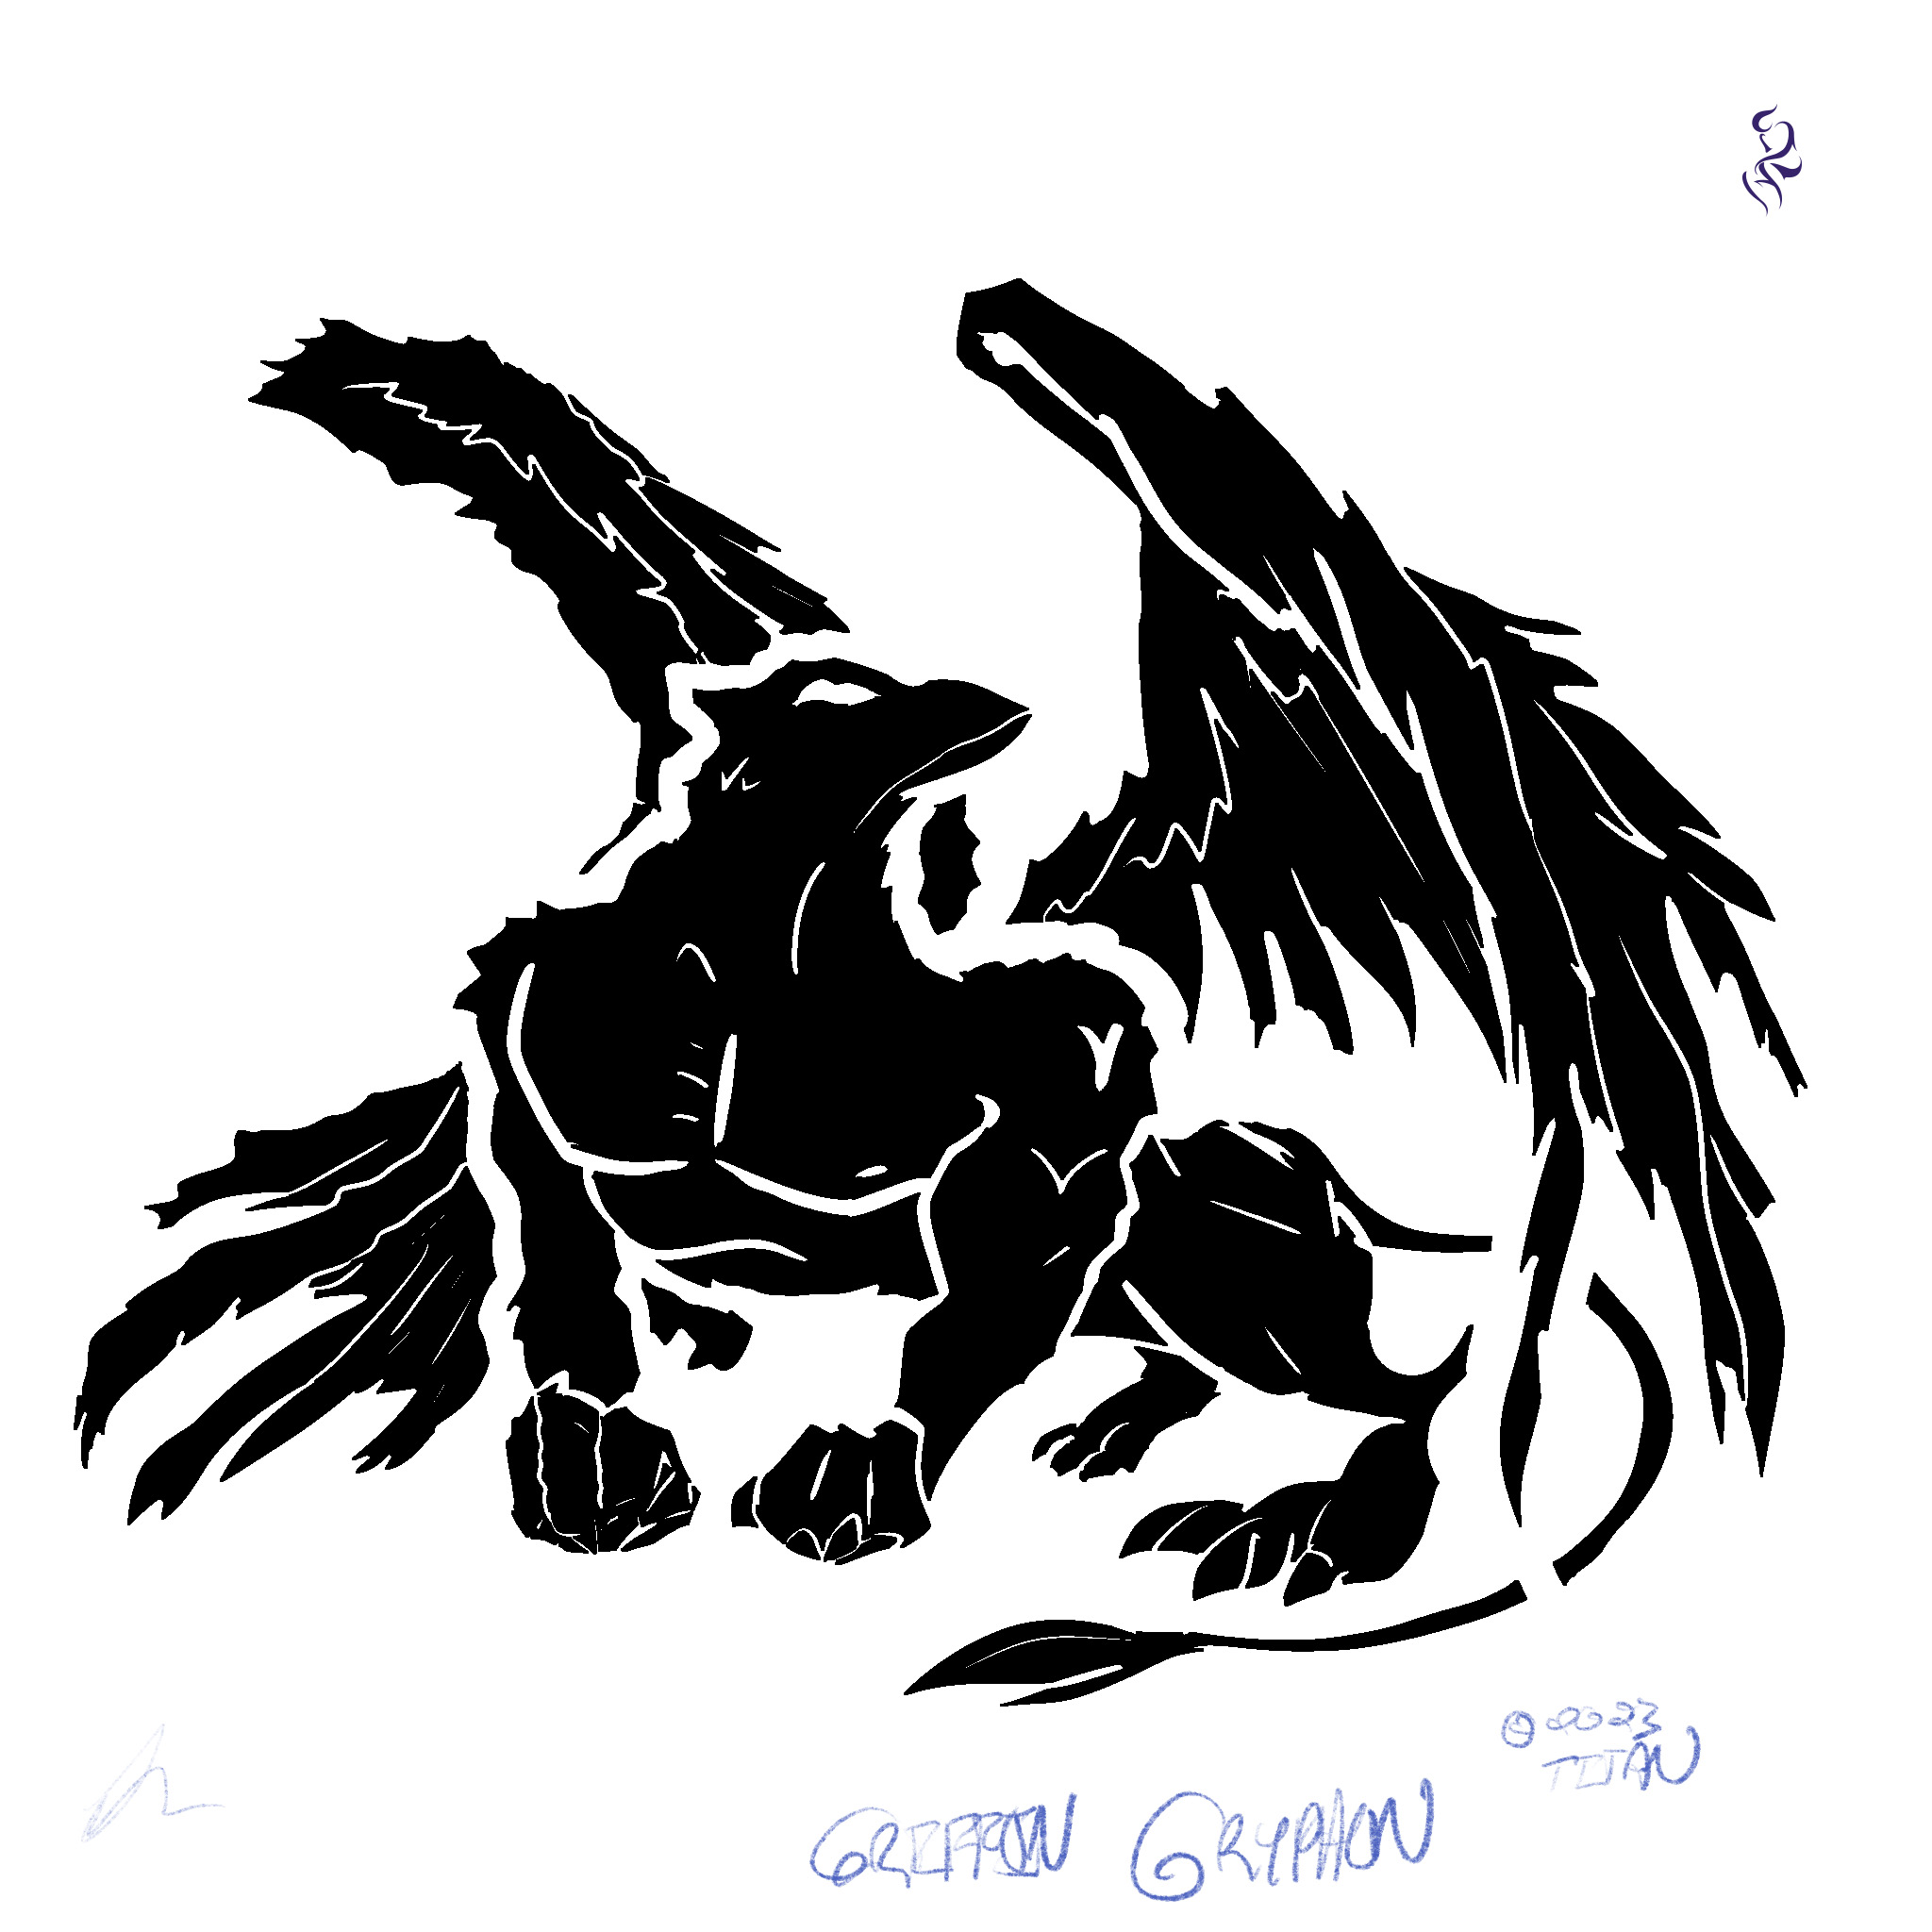 Version 2 of a logo concept for a client, this version of a Gryphon more generally swole and badass, with some epic wings.